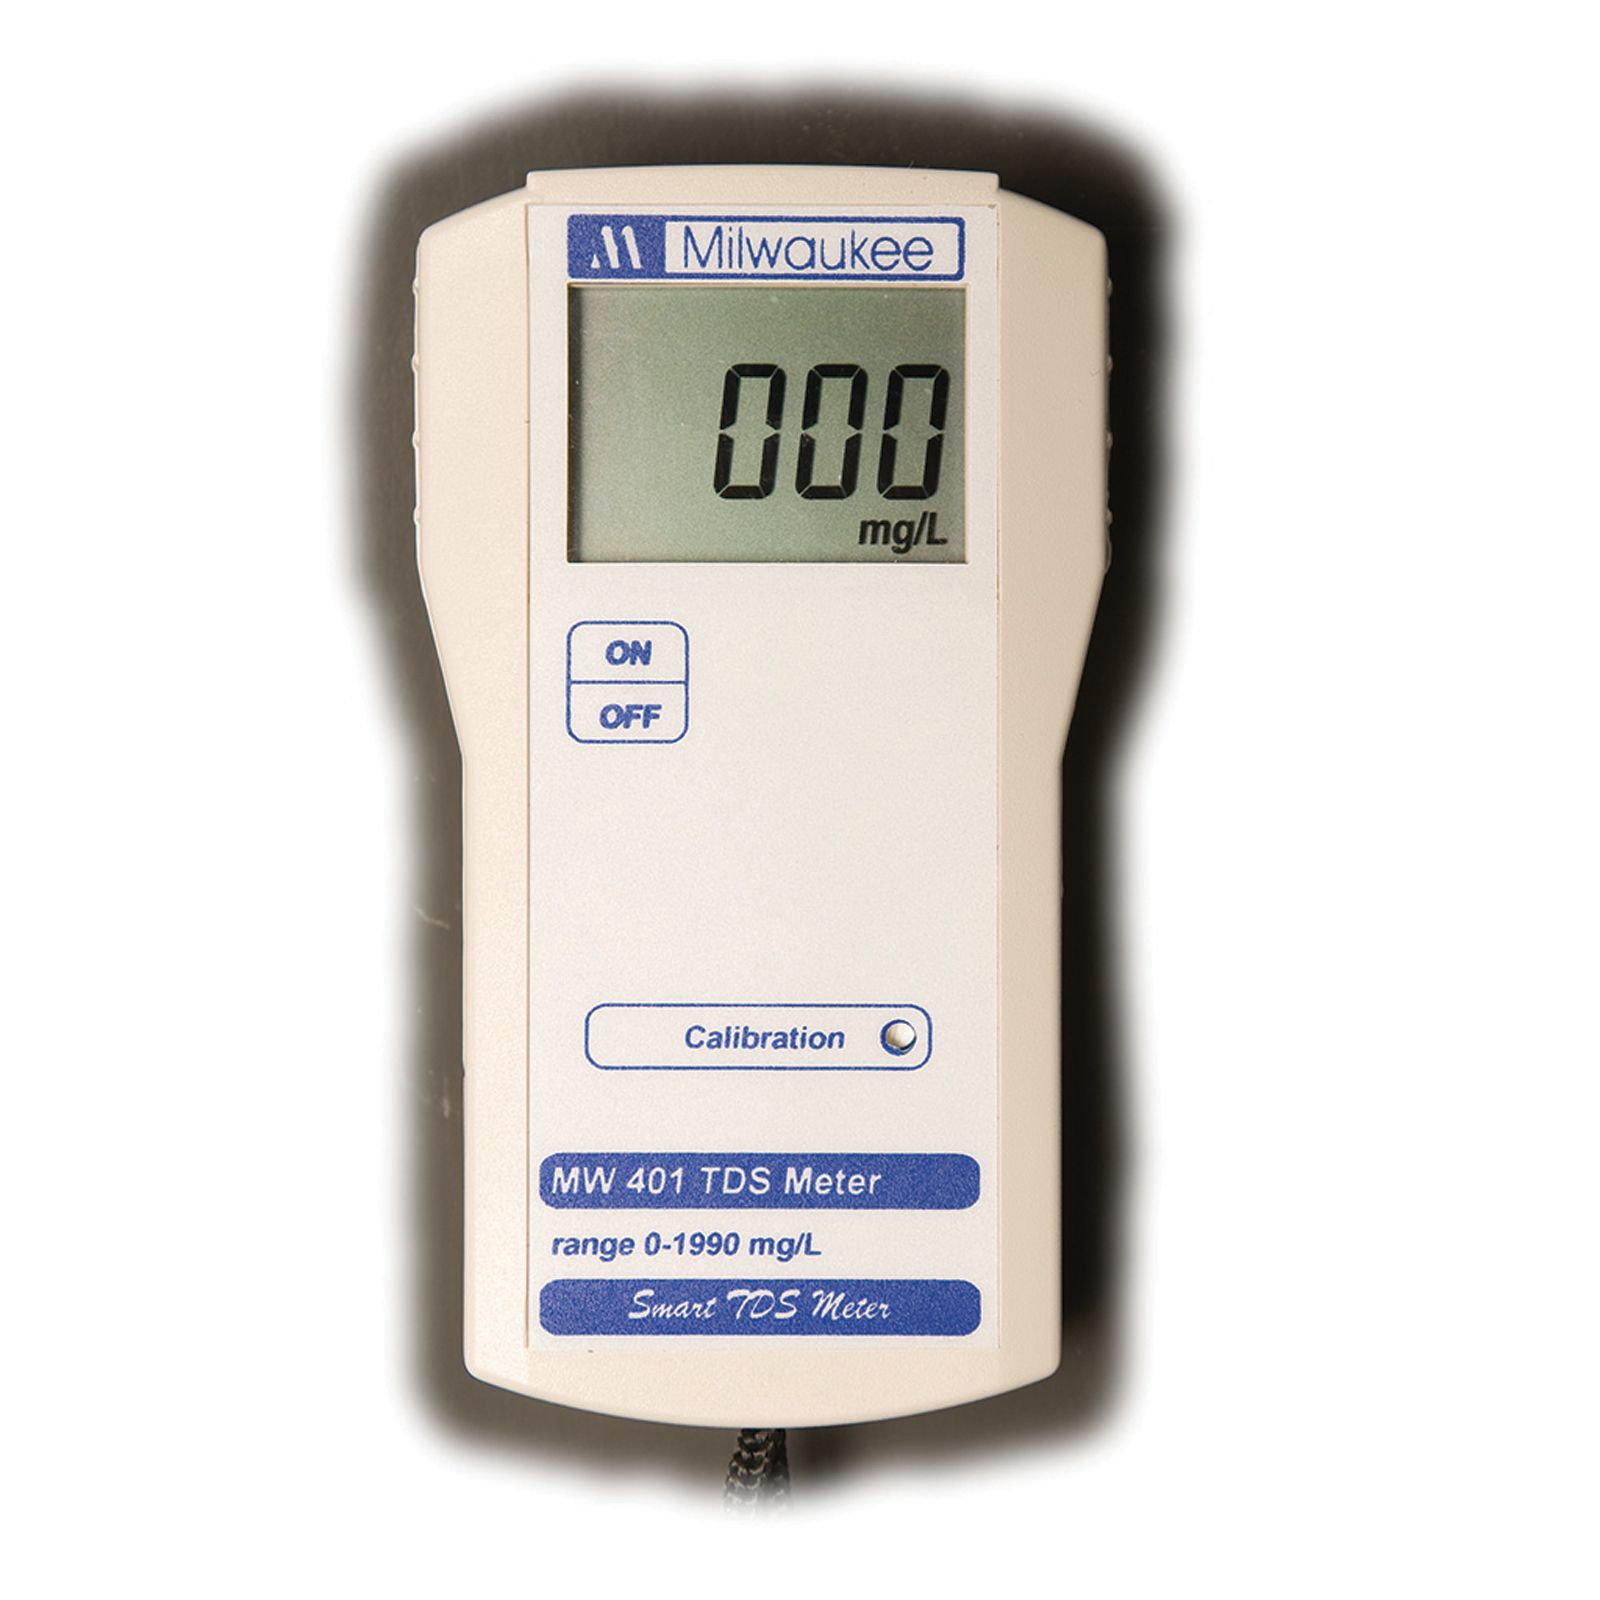 Milwaukee MINMW401 Tds Meter With 1 Point Manual Calibration